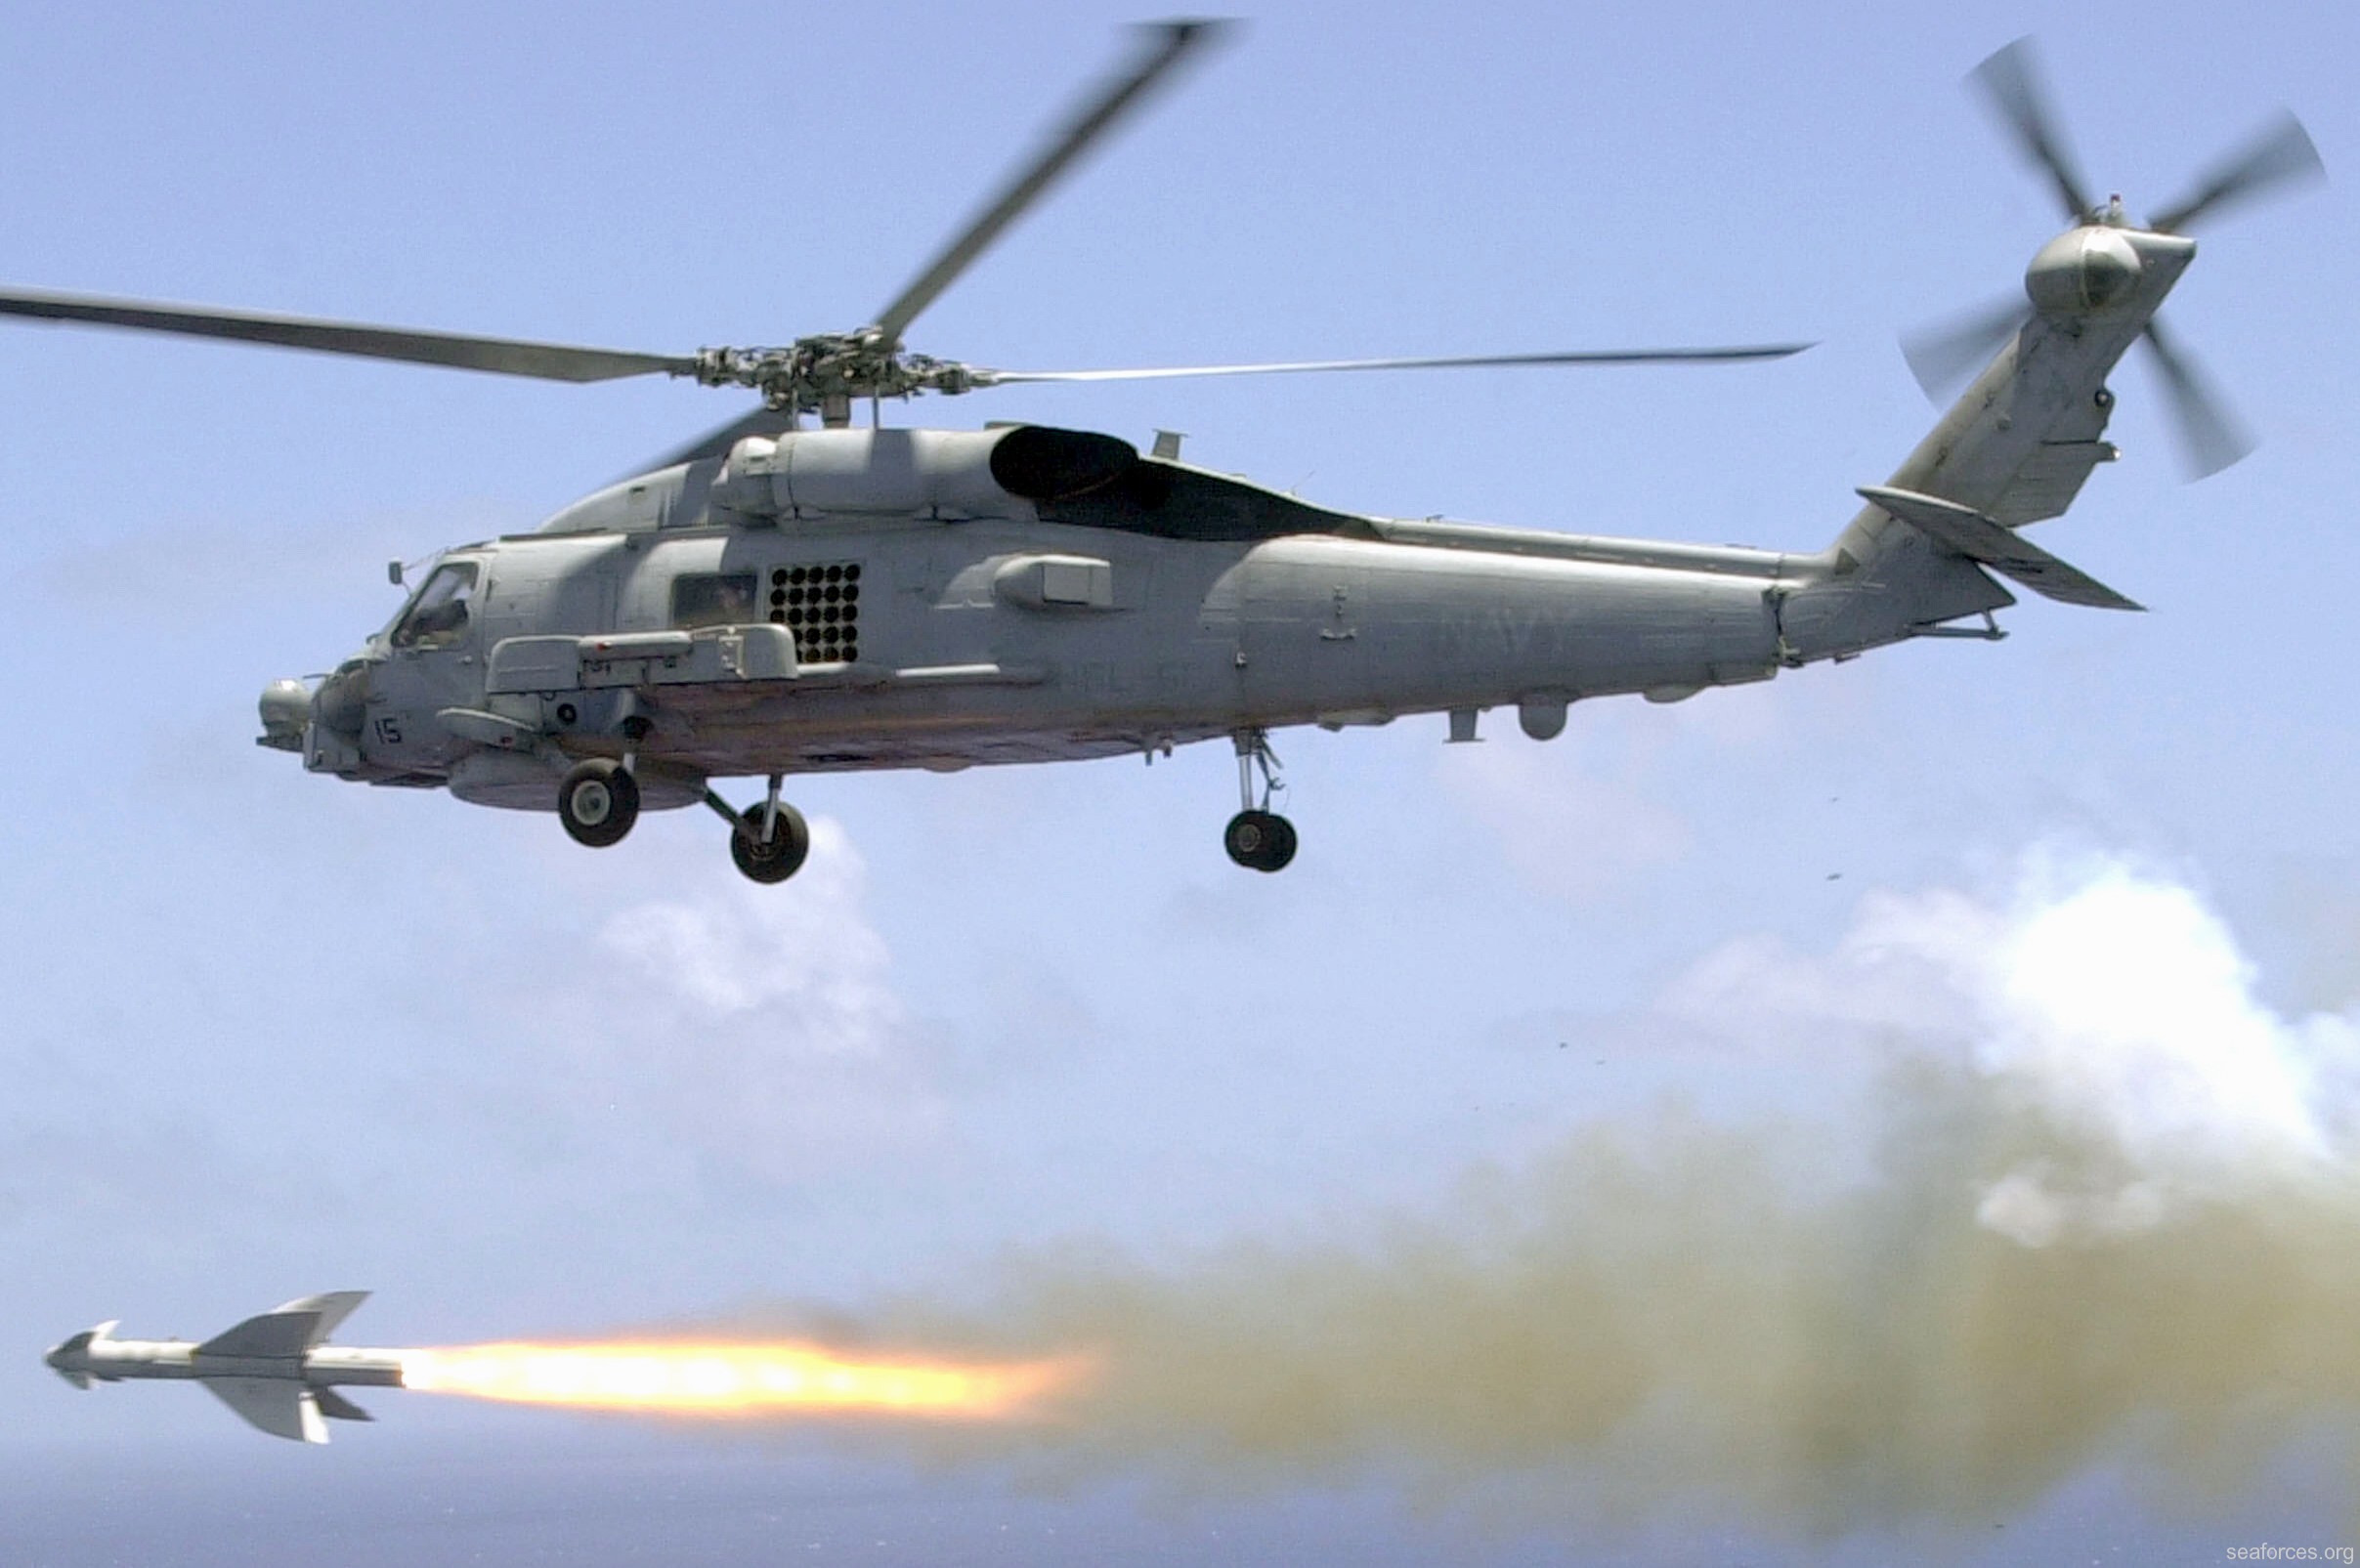 agm-119 penguin anti-ship missile ssm kongsberg defense 12 us navy helicopter launched